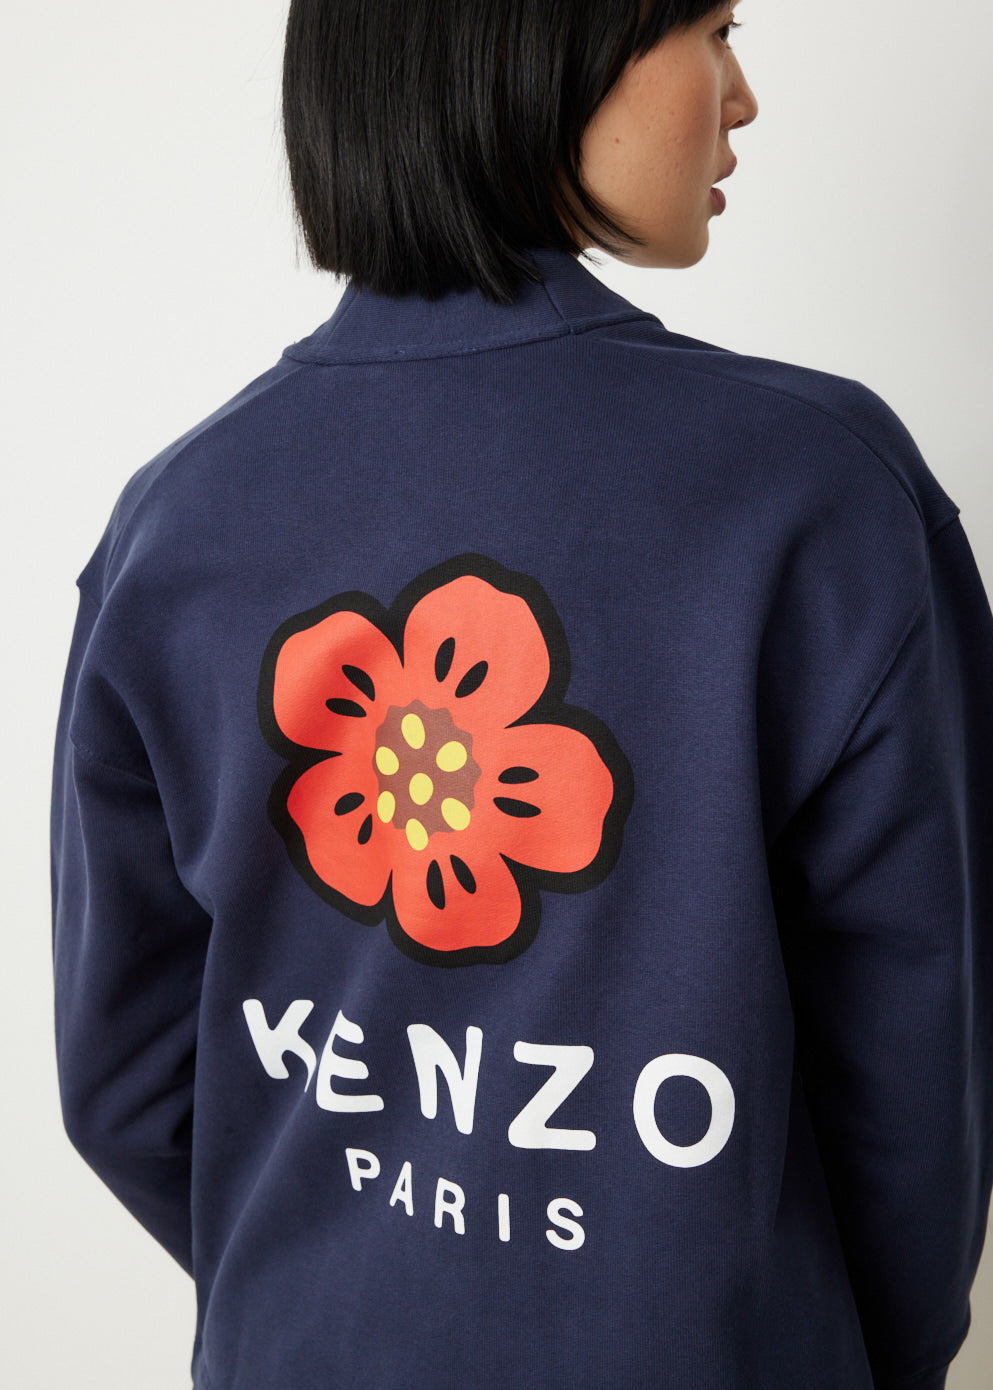 KENZO】 @kenzo “FW22 COLLECTION” Available in-store & online store